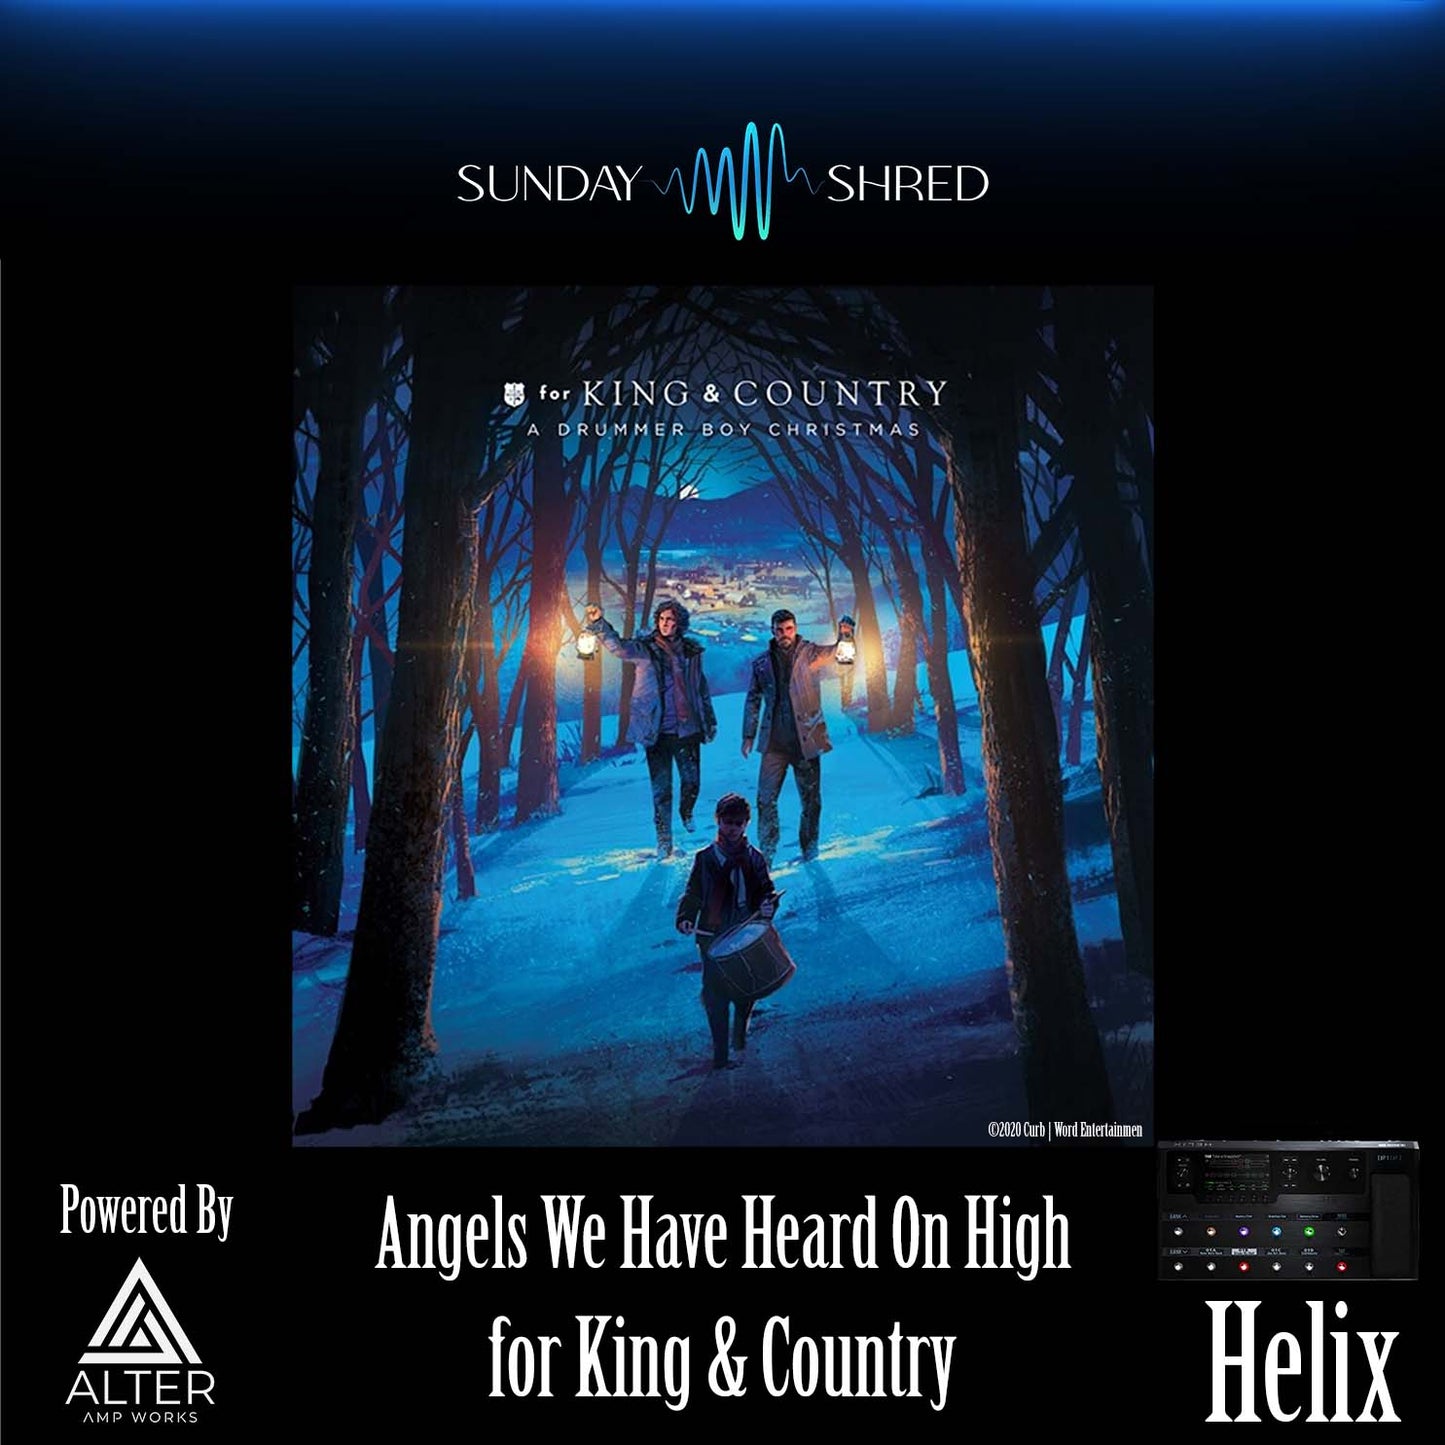 Angels We Have Heard You On High - for King & Country - Helix Patch